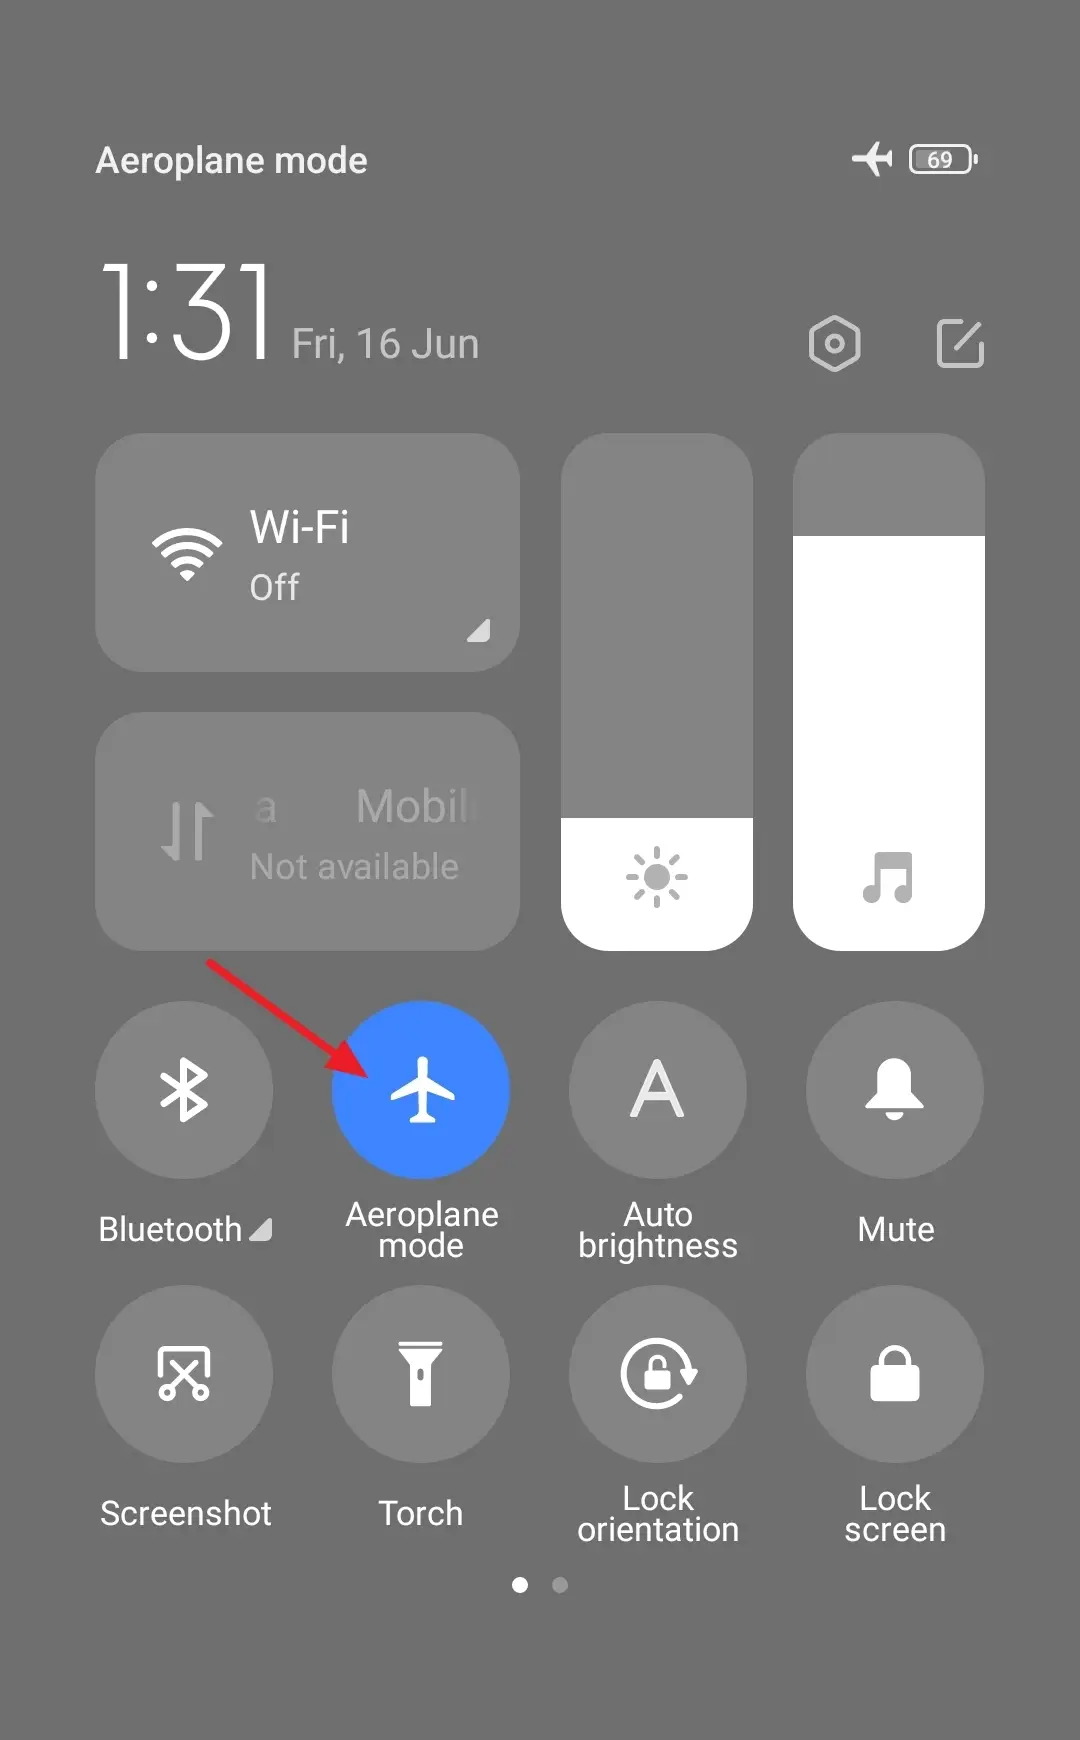 Swipe down from the top-right corner of your Home Screen where your Mobile Signals, WiFi Signals, and Battery Icon are located. Go to Aeroplane Mode and Turn it On.